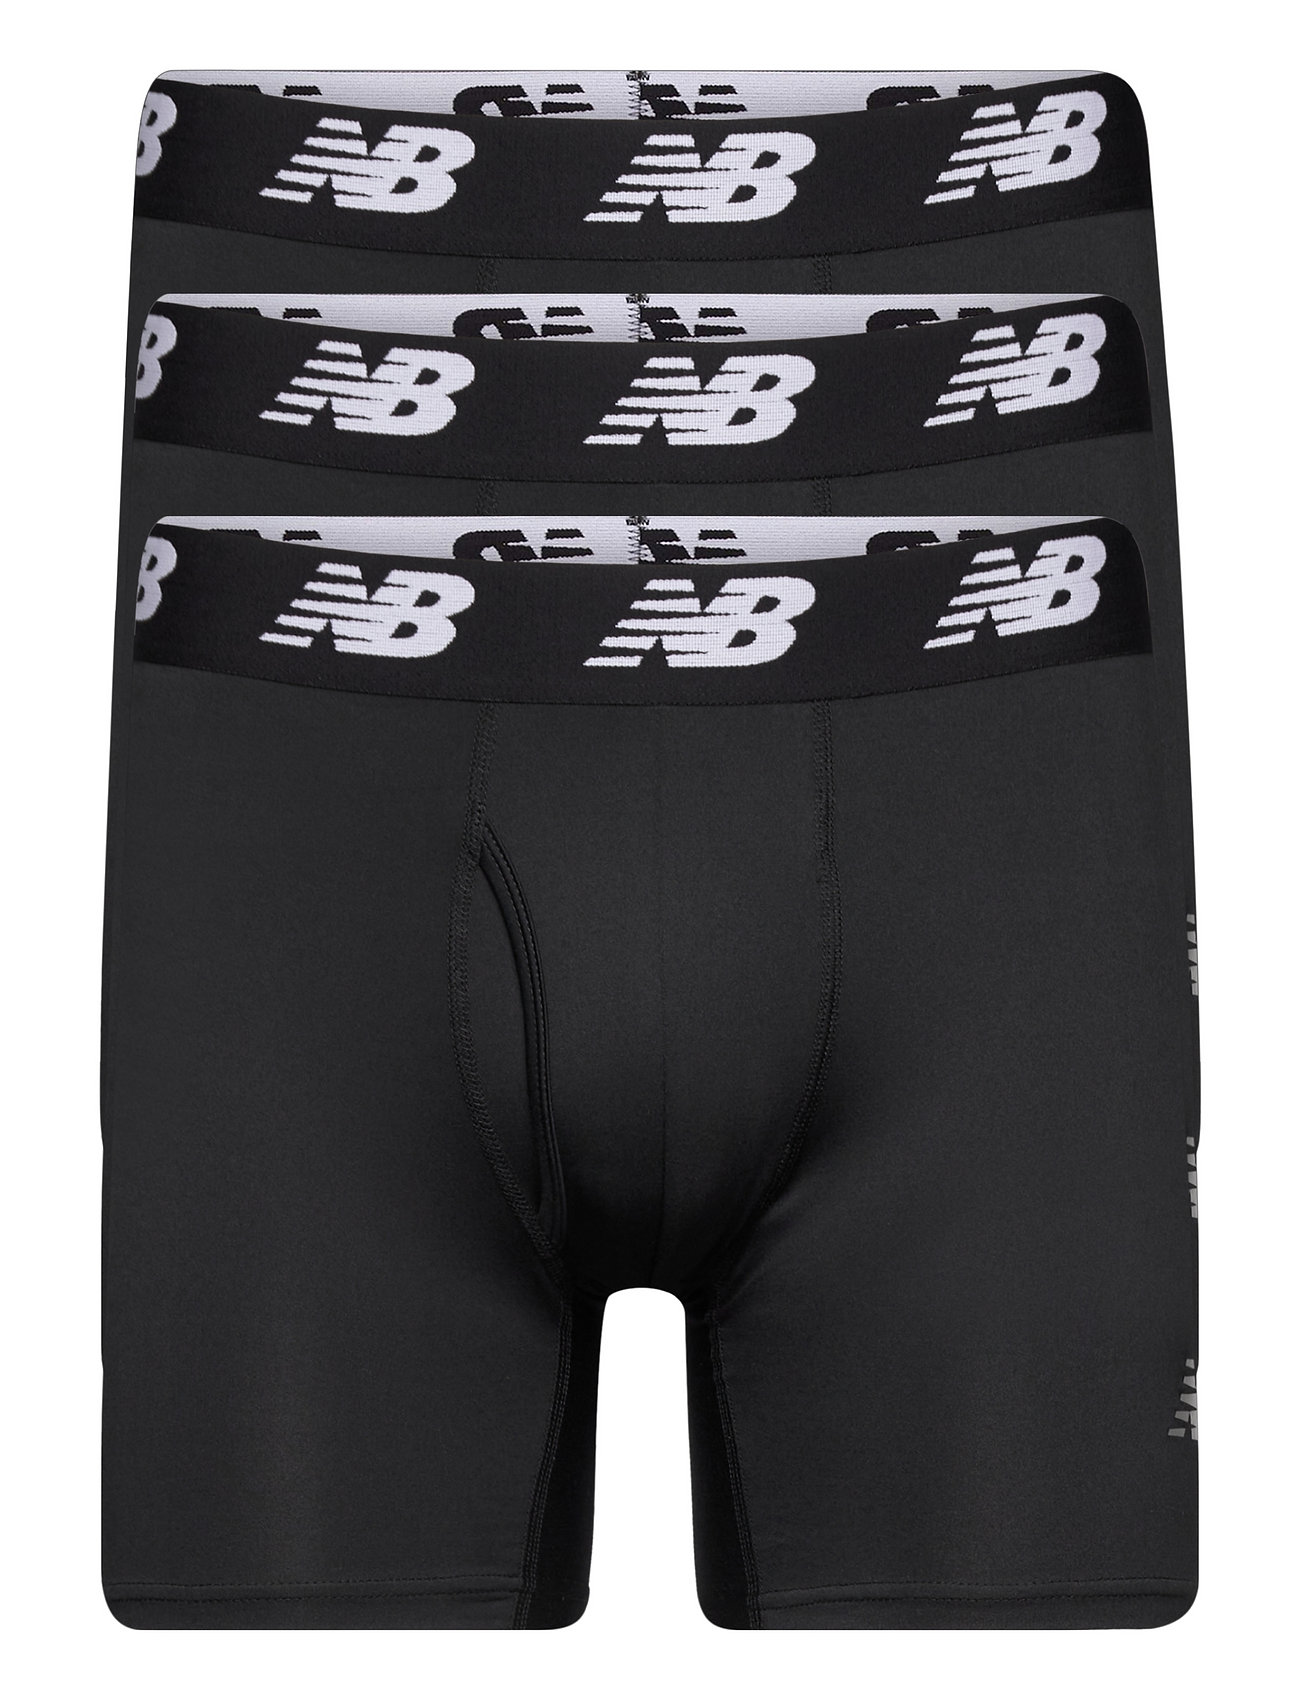 Mens Premium 6 Inch Boxer Brief With Fly 3 Pack Sport Boxers Black New Balance